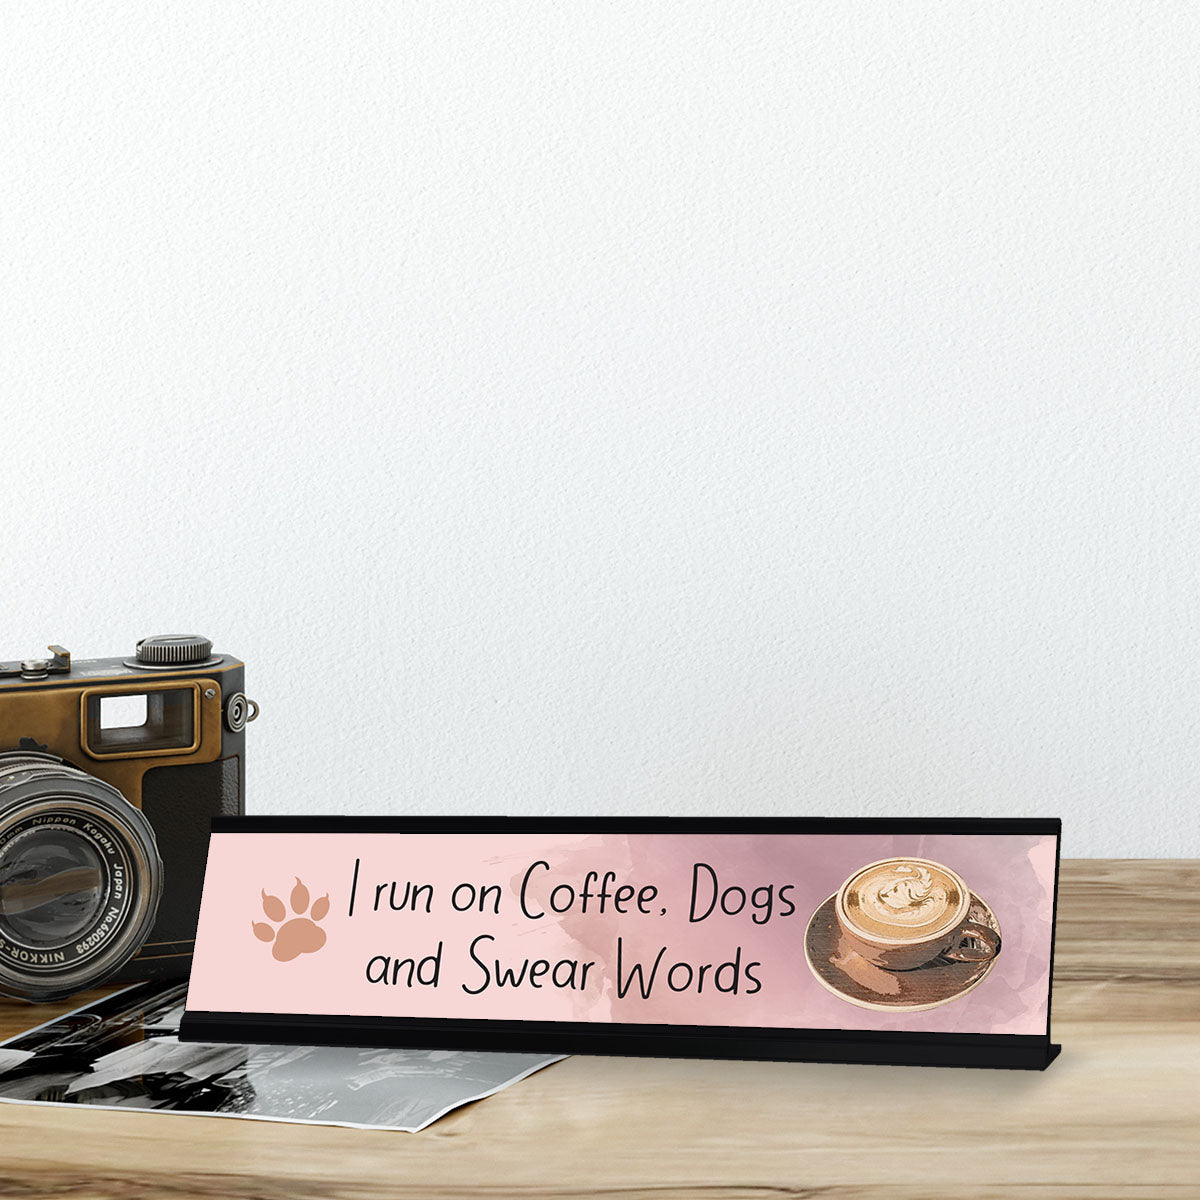 I Run on Coffee, Dogs and Swear Words, Gaucho Goods Desk Signs (2 x 8")